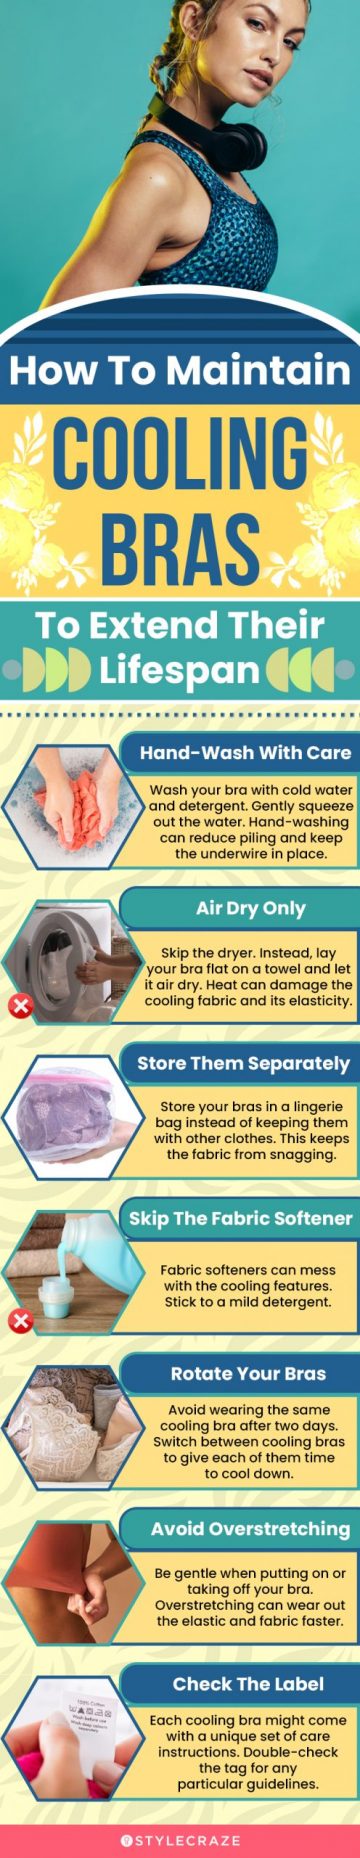 How To Maintain Cooling Bras To Extend Their Lifespan (infographic)